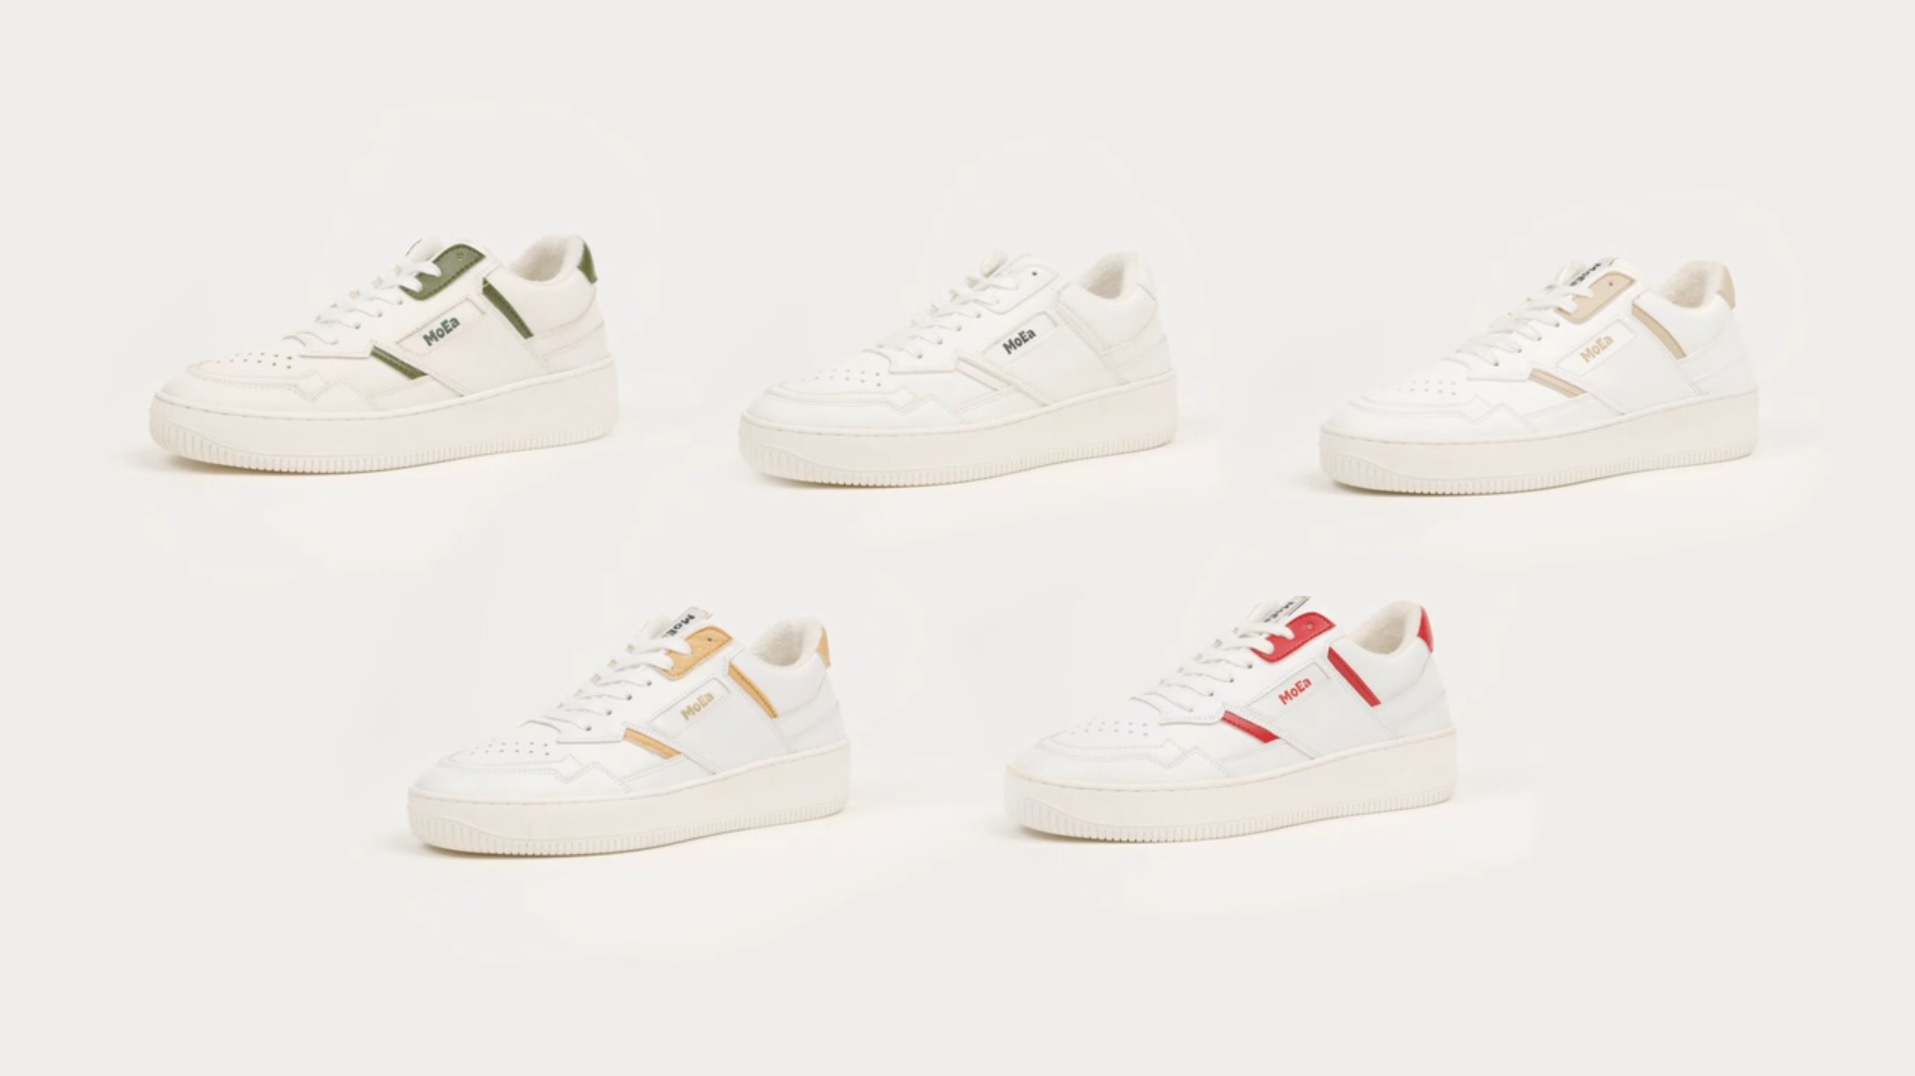 Aanval correct subtiel These Stylish Sneakers Are Made From Fruits and Plants